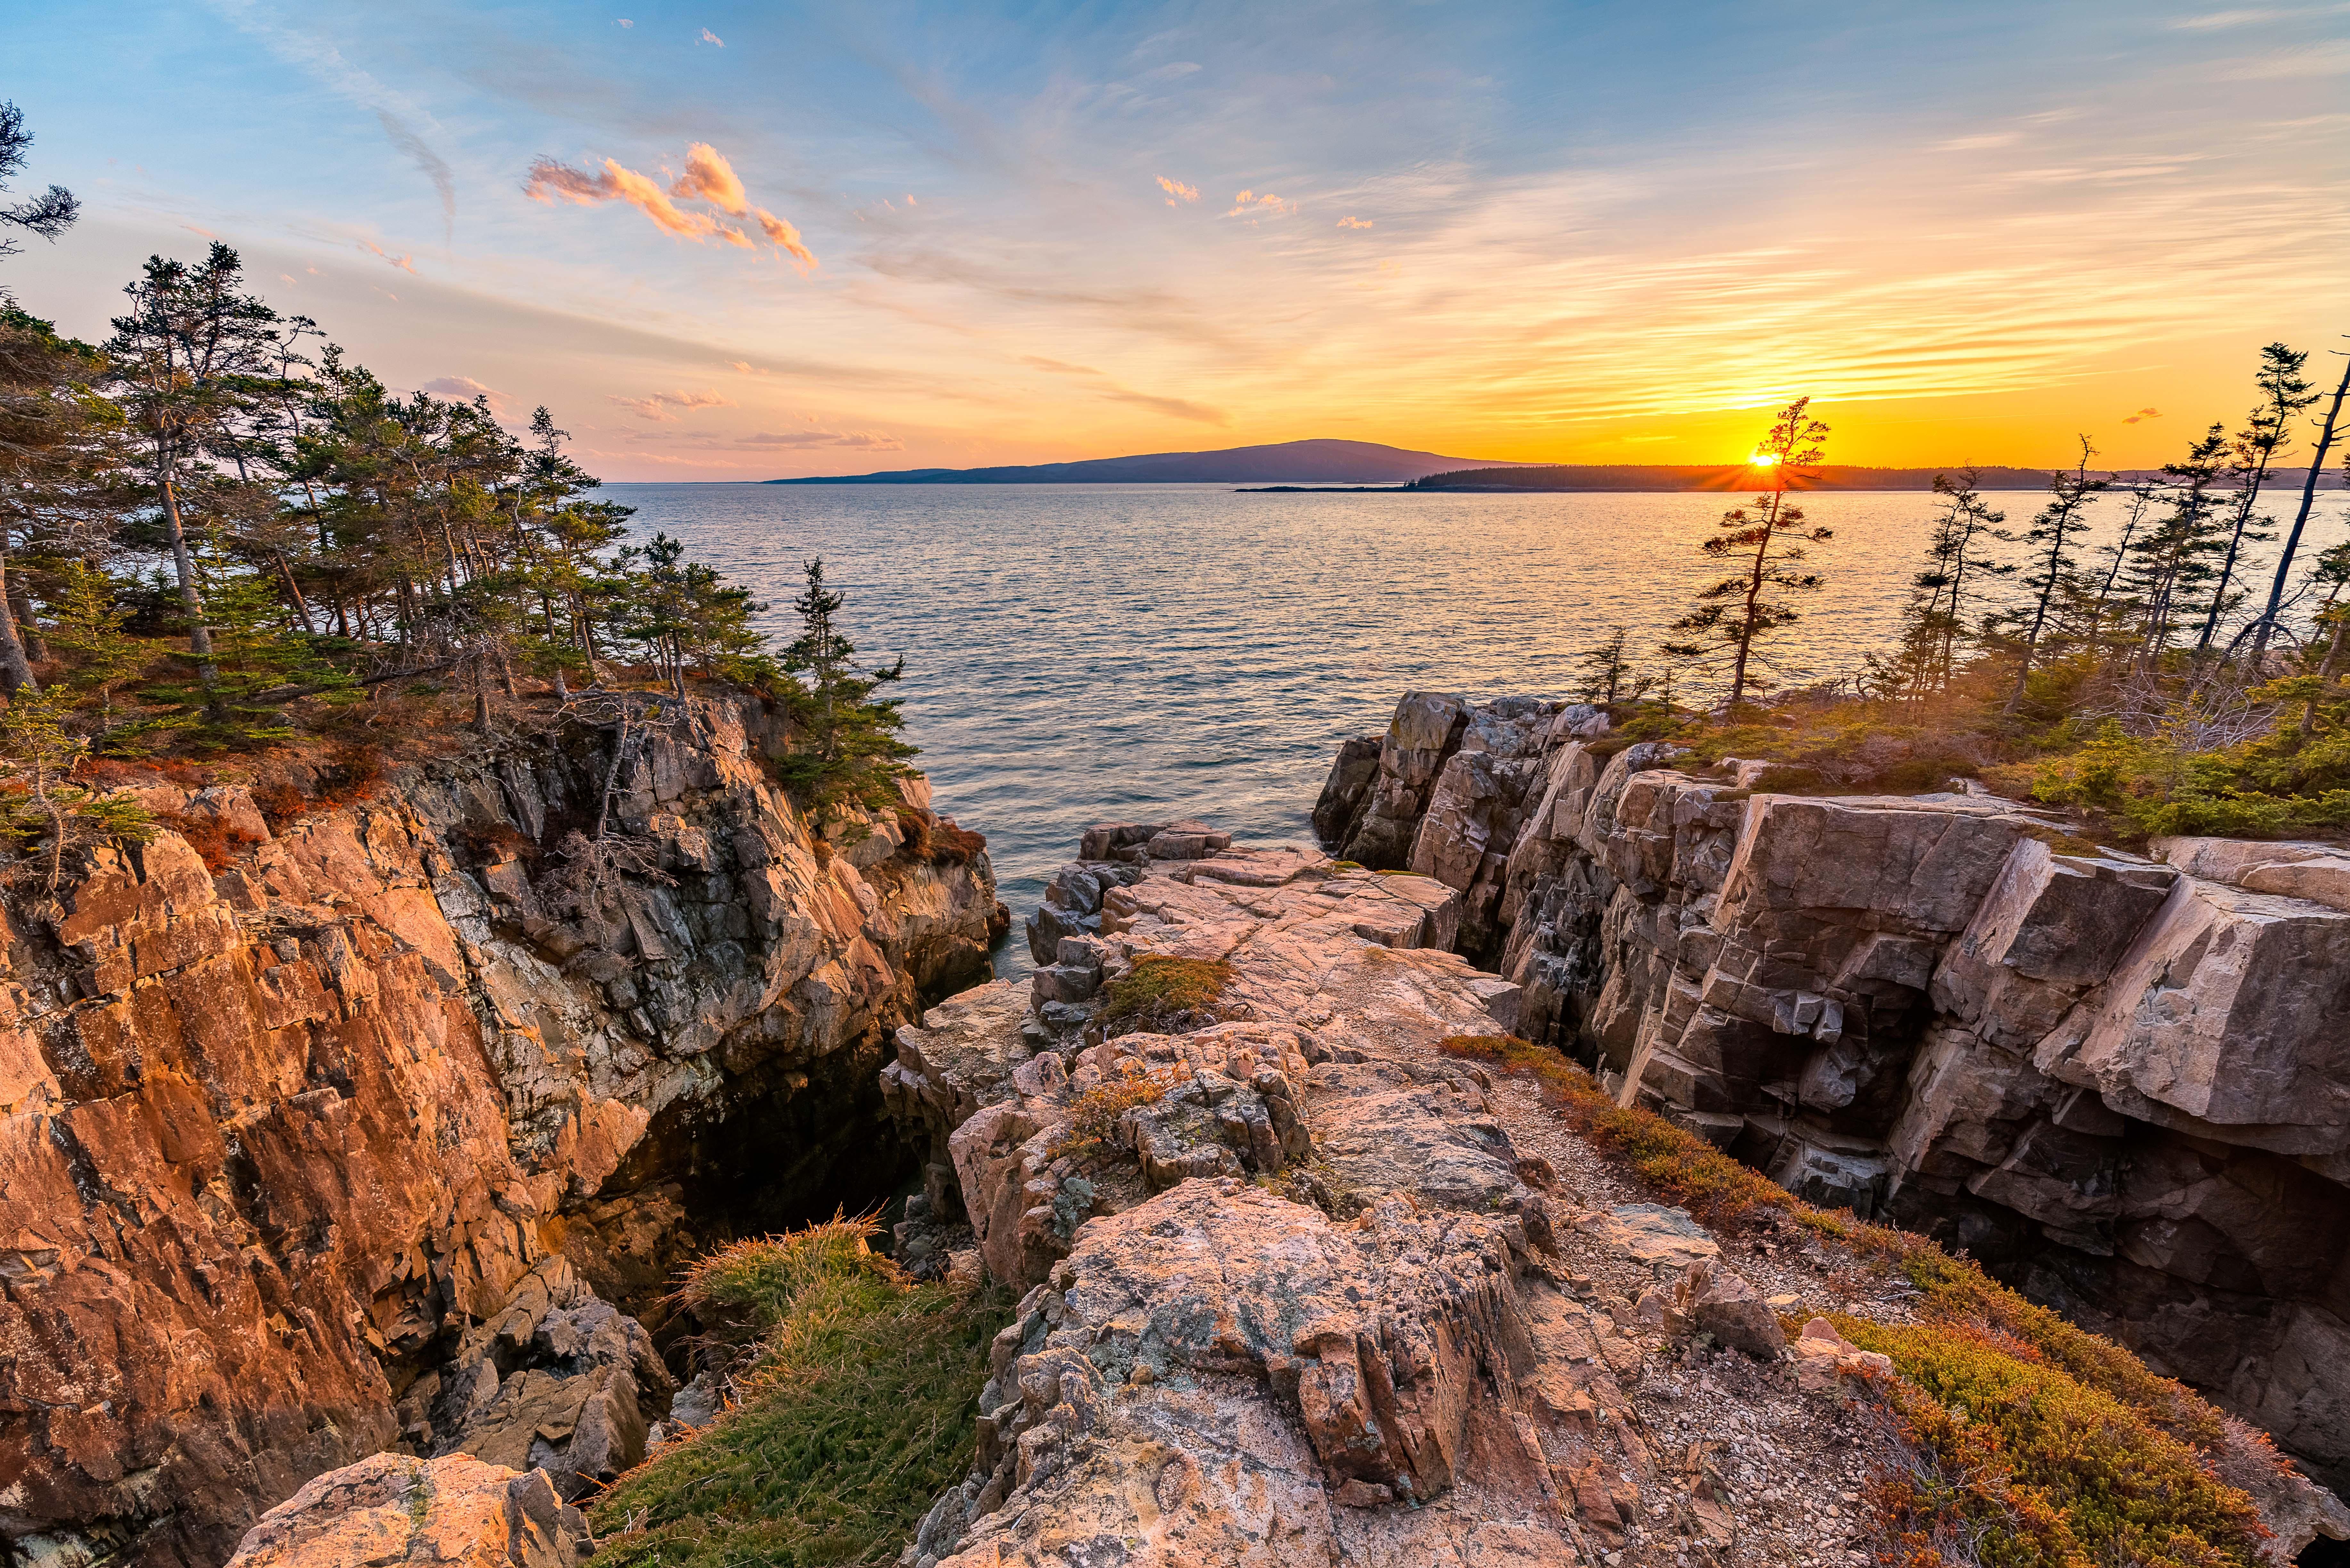 Image of Acadia National Park, cliffs with trees overlooking the water at sunrise